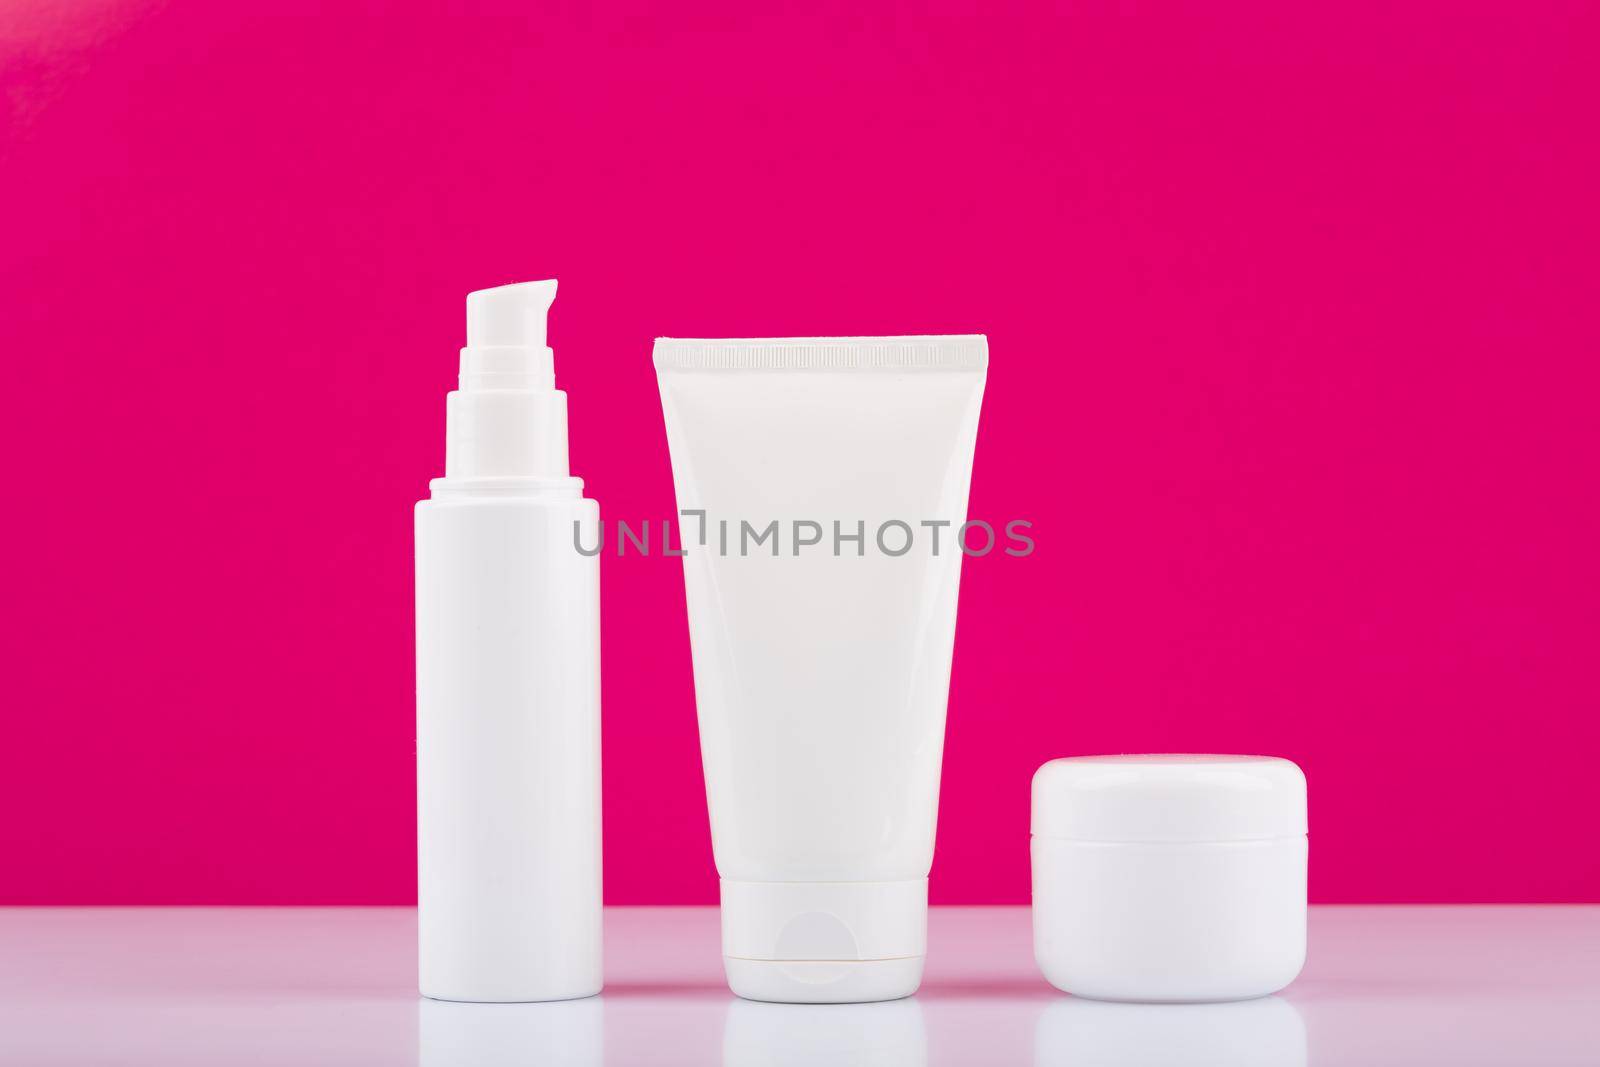 Three white glossy cream jars on white table against pink background. Concept of daily skin care by Senorina_Irina